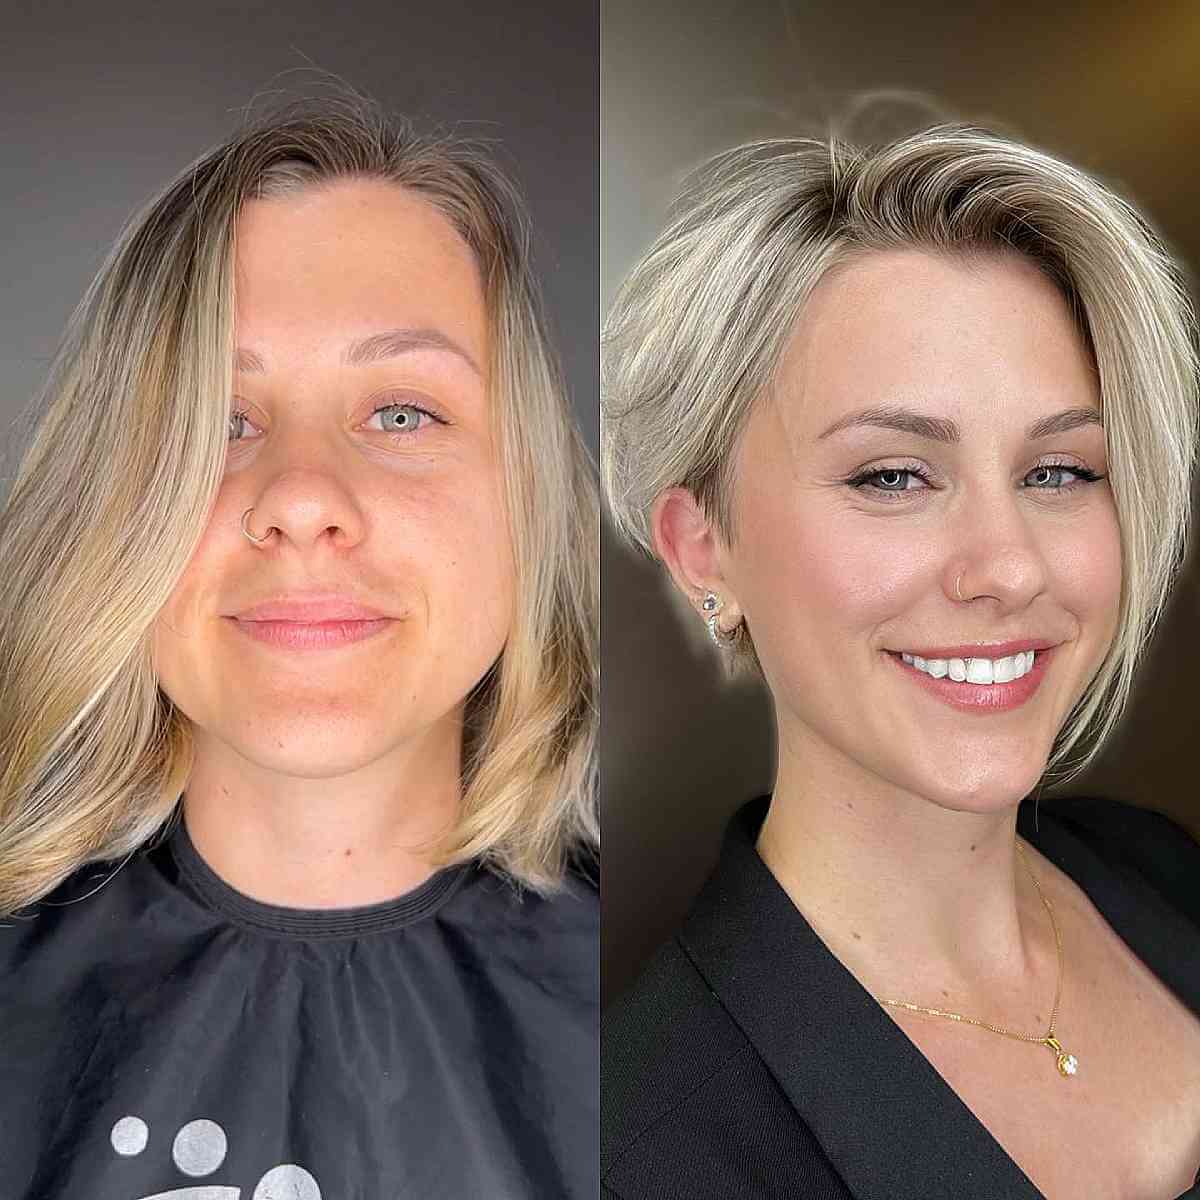 100+ Short Haircuts for Thin, Fine Hair to Appear Thick & Full